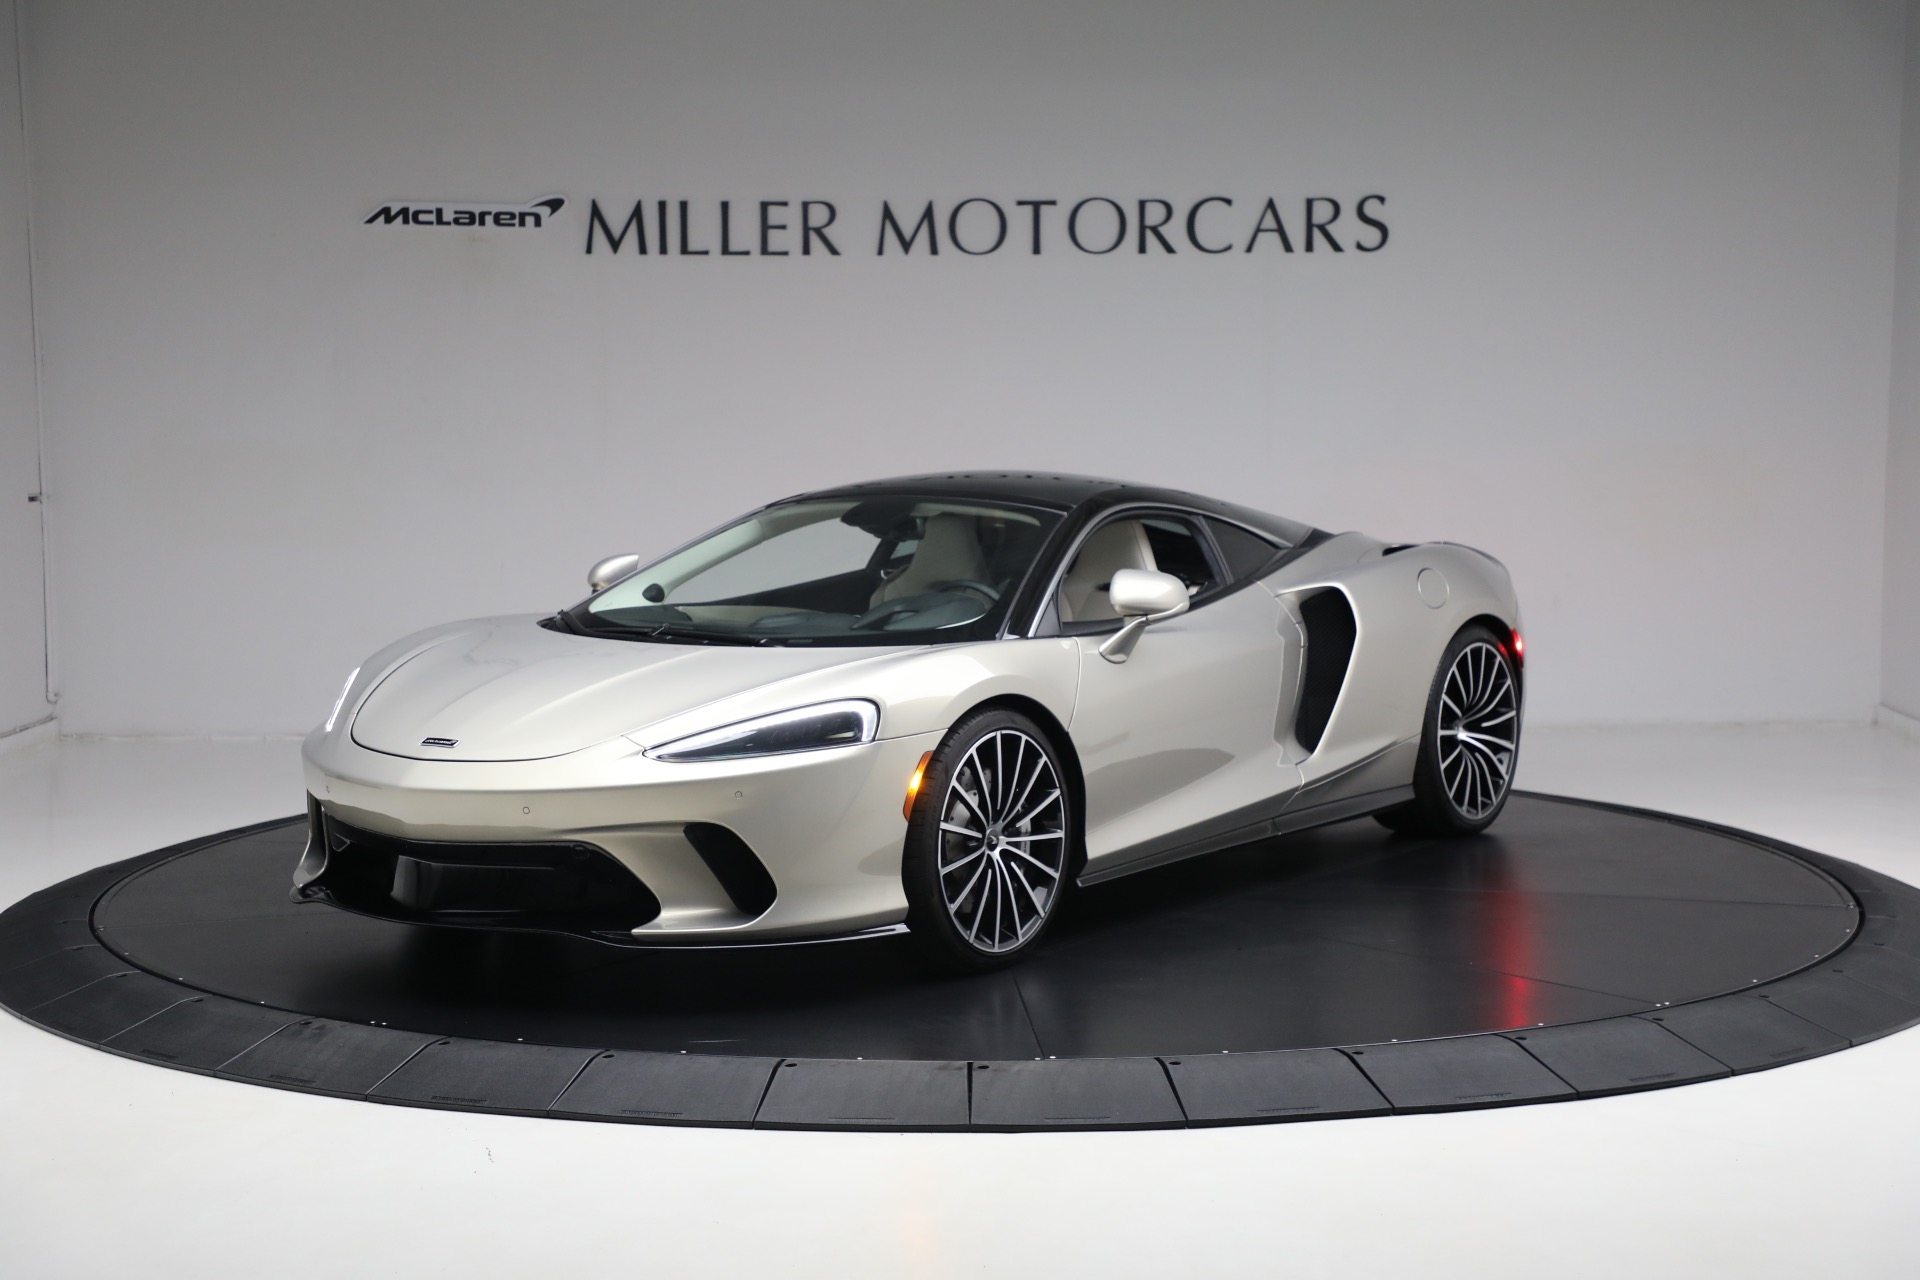 Used 2020 McLaren GT Luxe for sale $169,900 at Pagani of Greenwich in Greenwich CT 06830 1